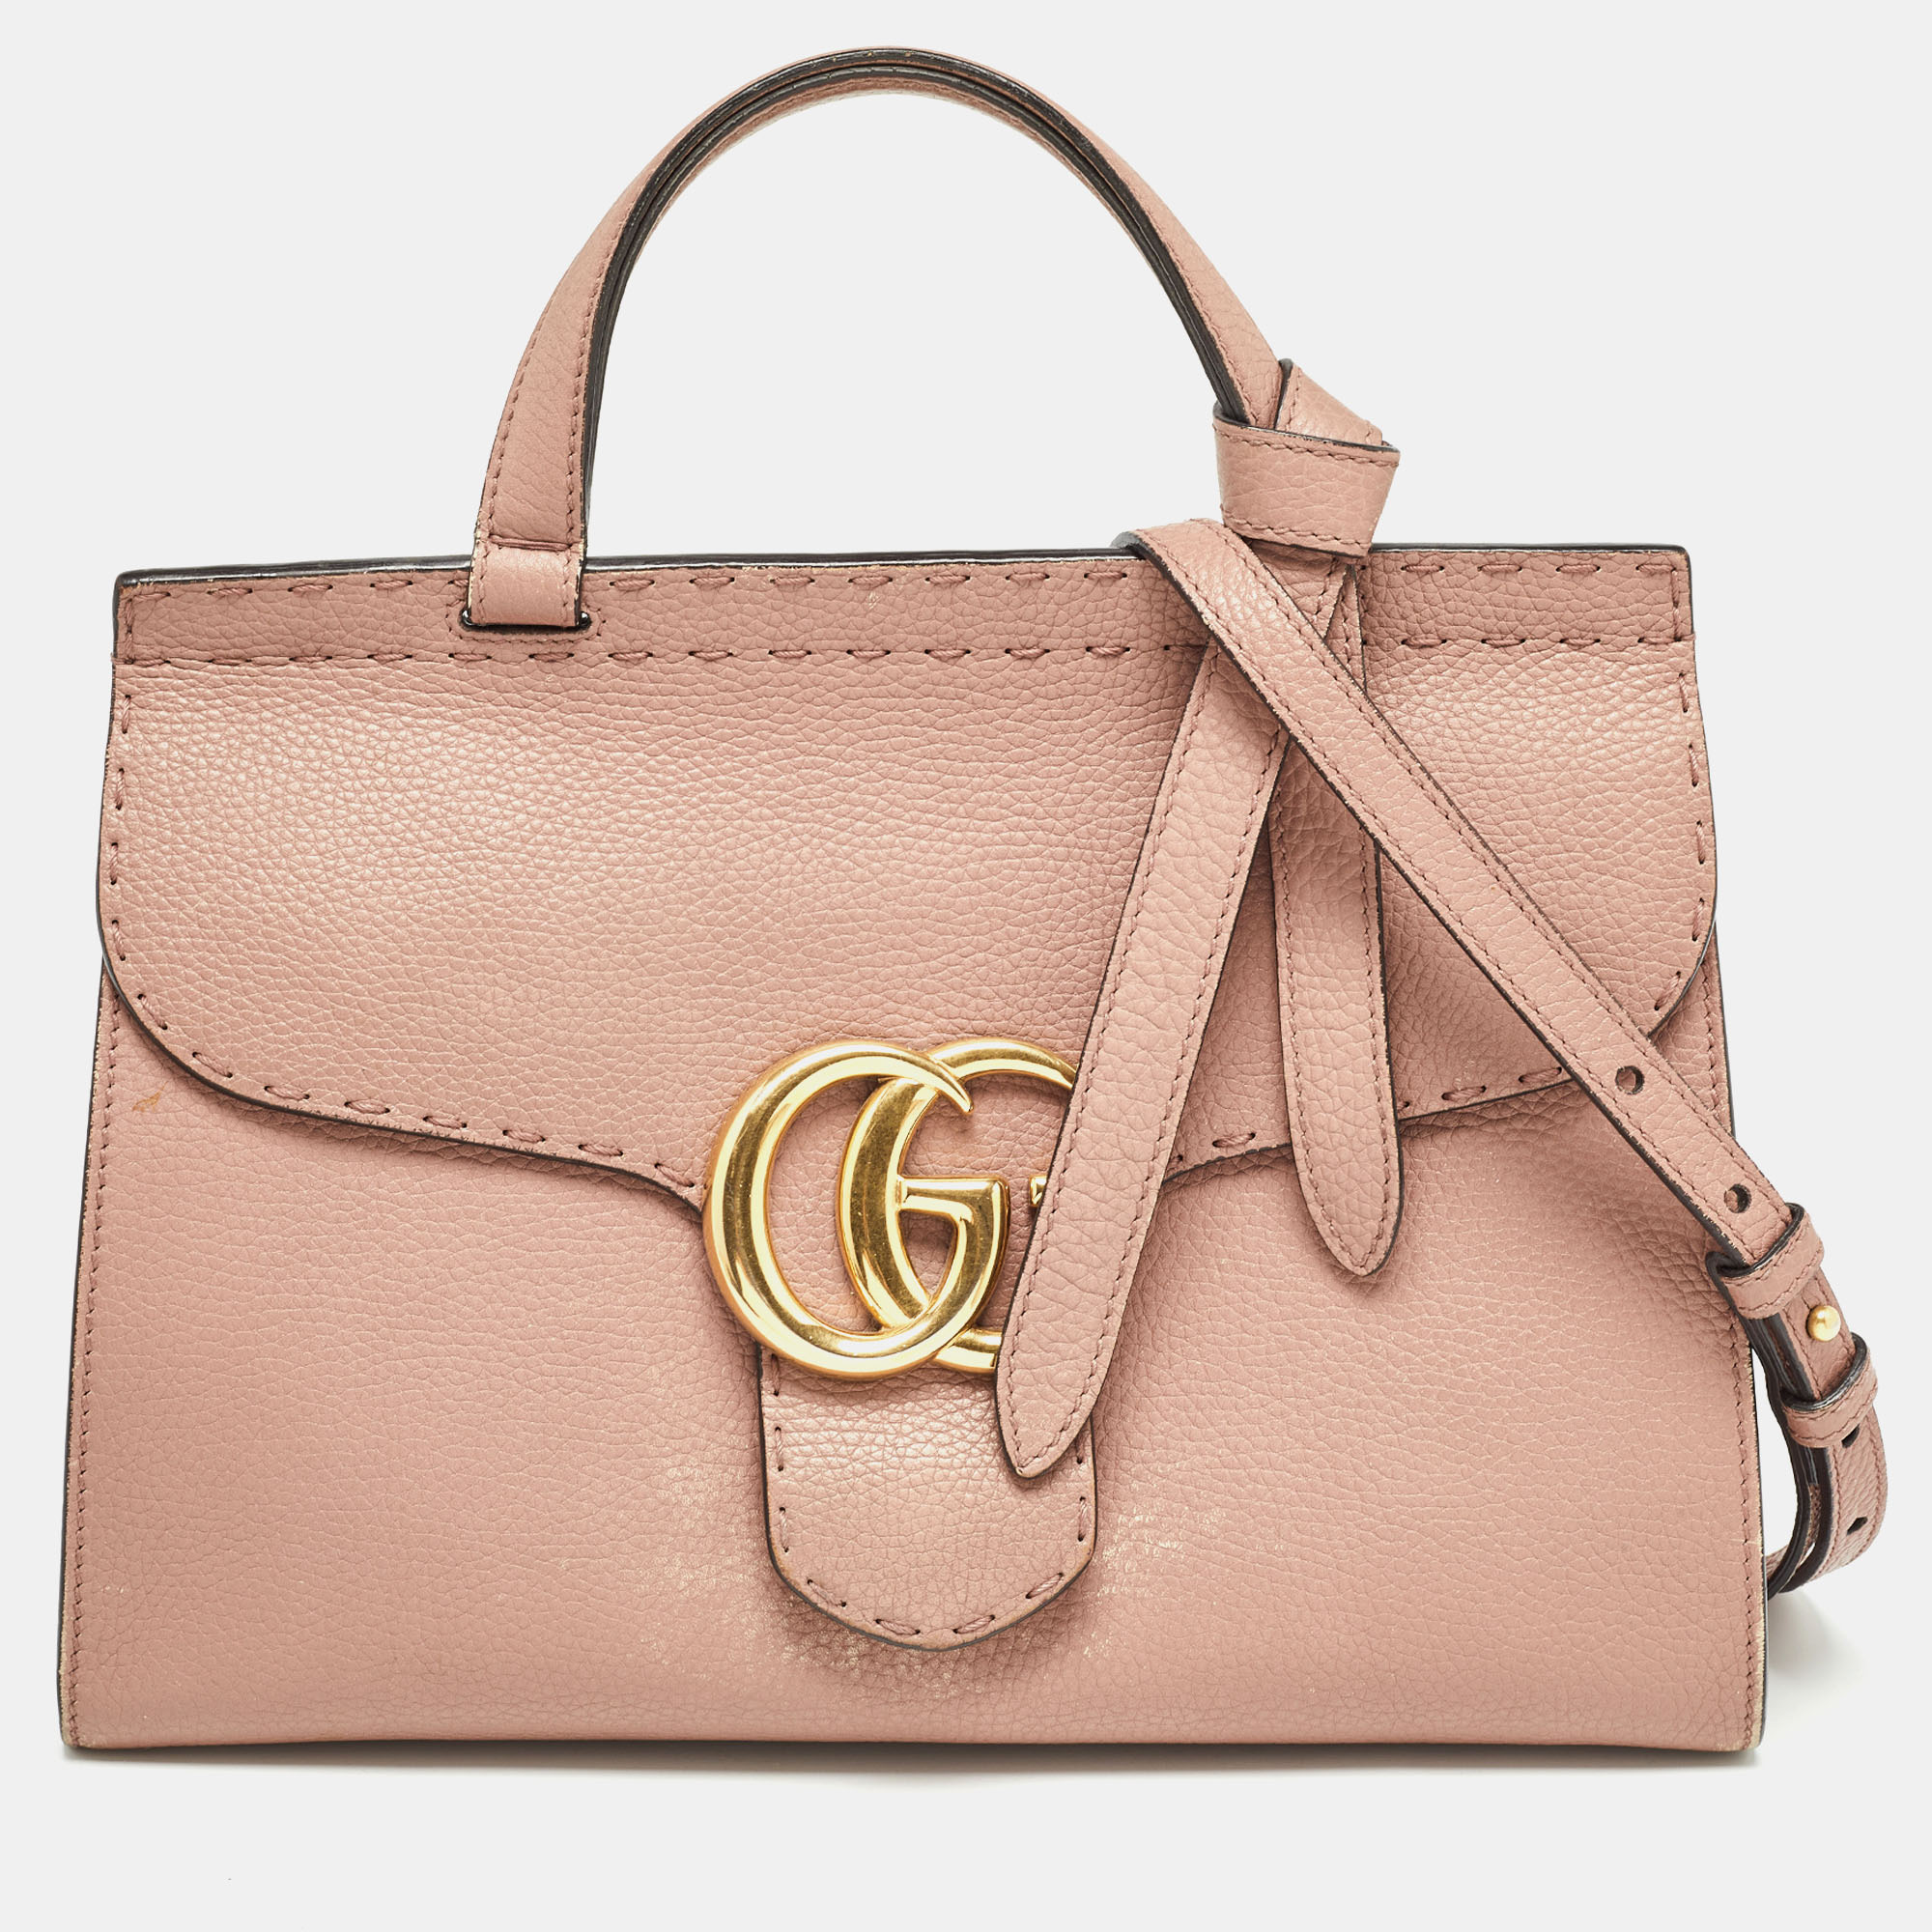 Gucci old rose leather medium gg marmont top handle bag